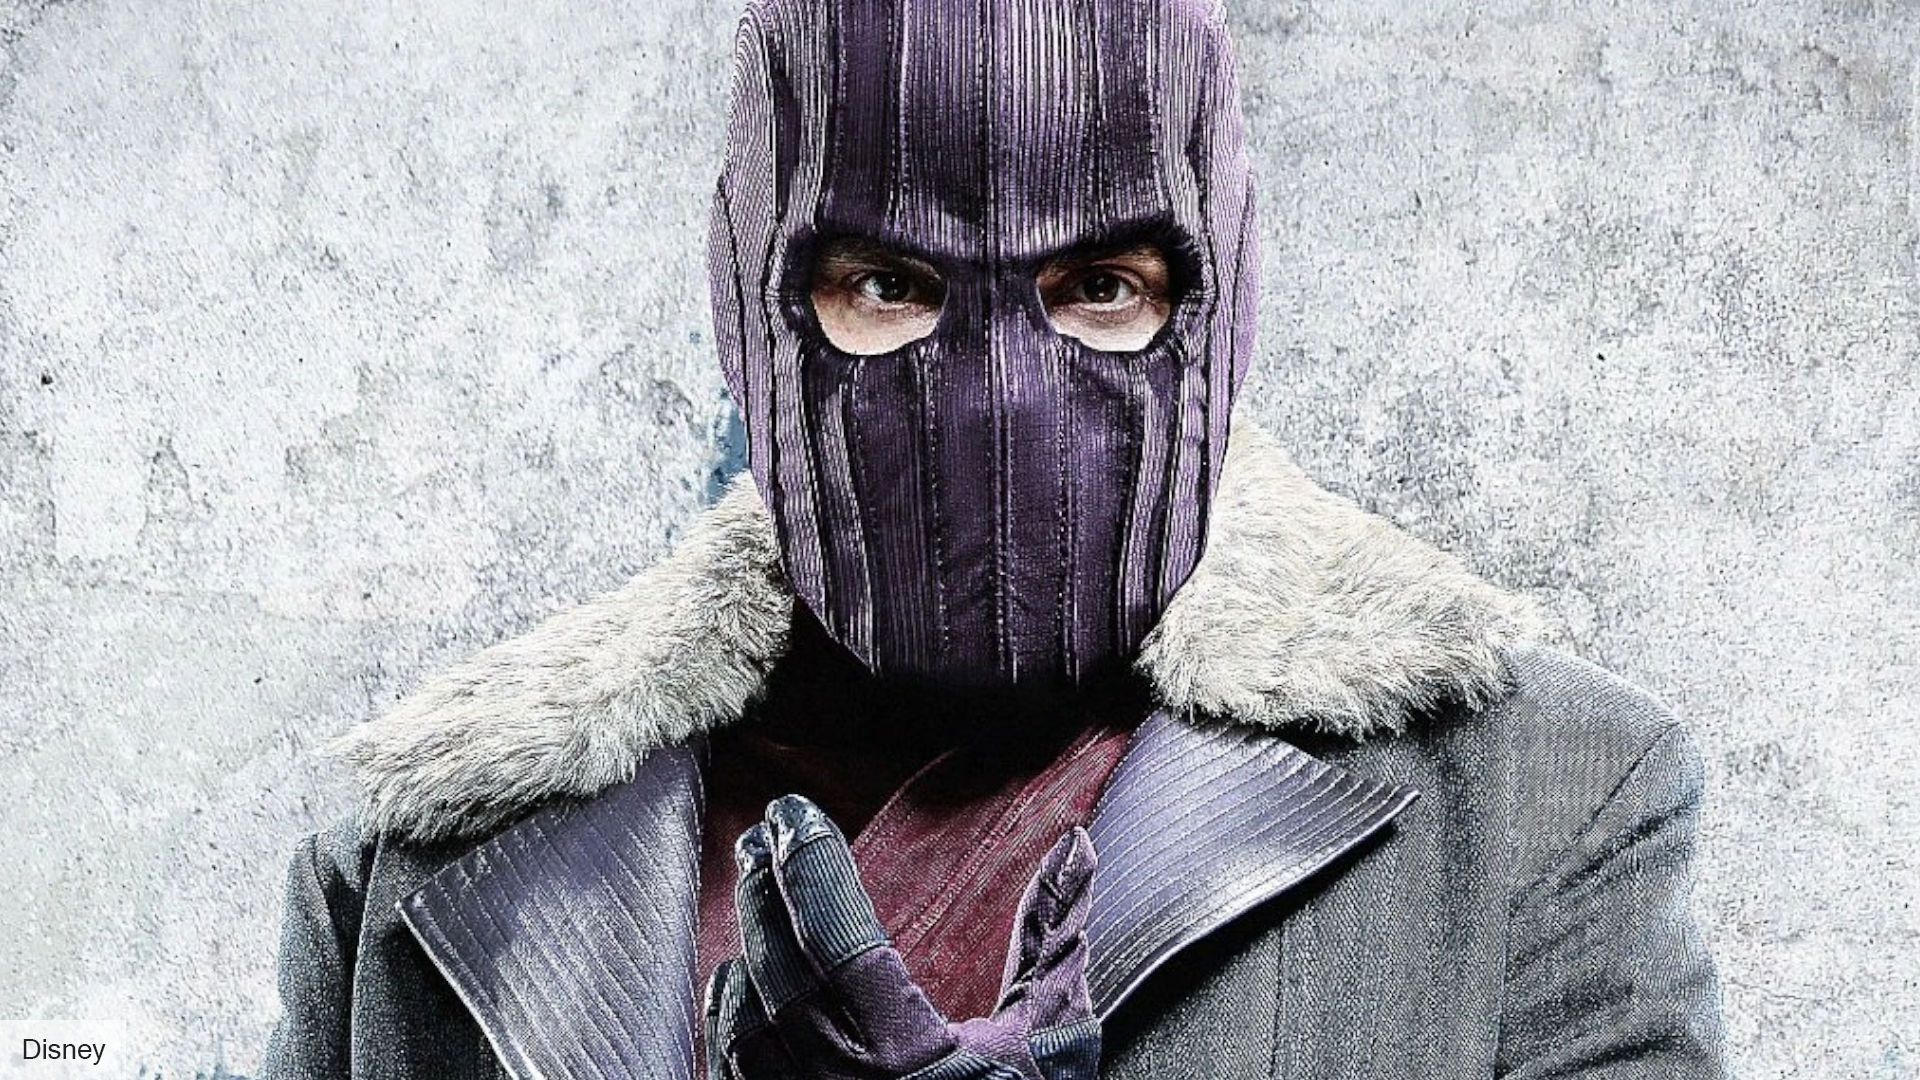 Thunderbolts release date: Baron Zemo in Falcon and the Winter Soldier